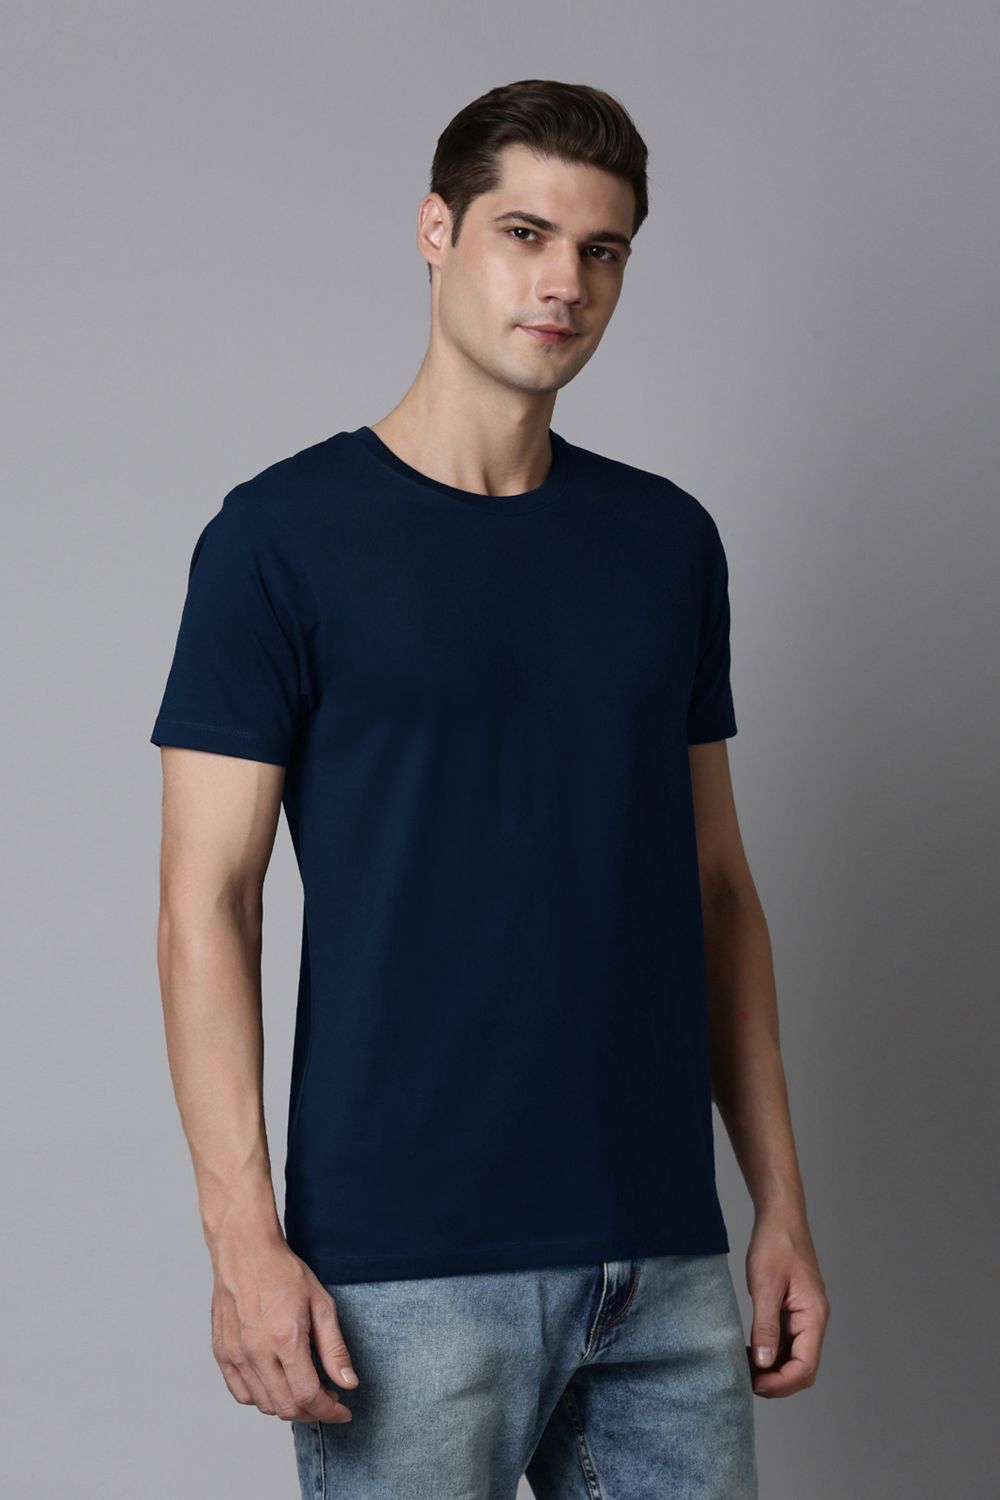 Teal Navy - Solid t-shirt  Maxzone Clothing   